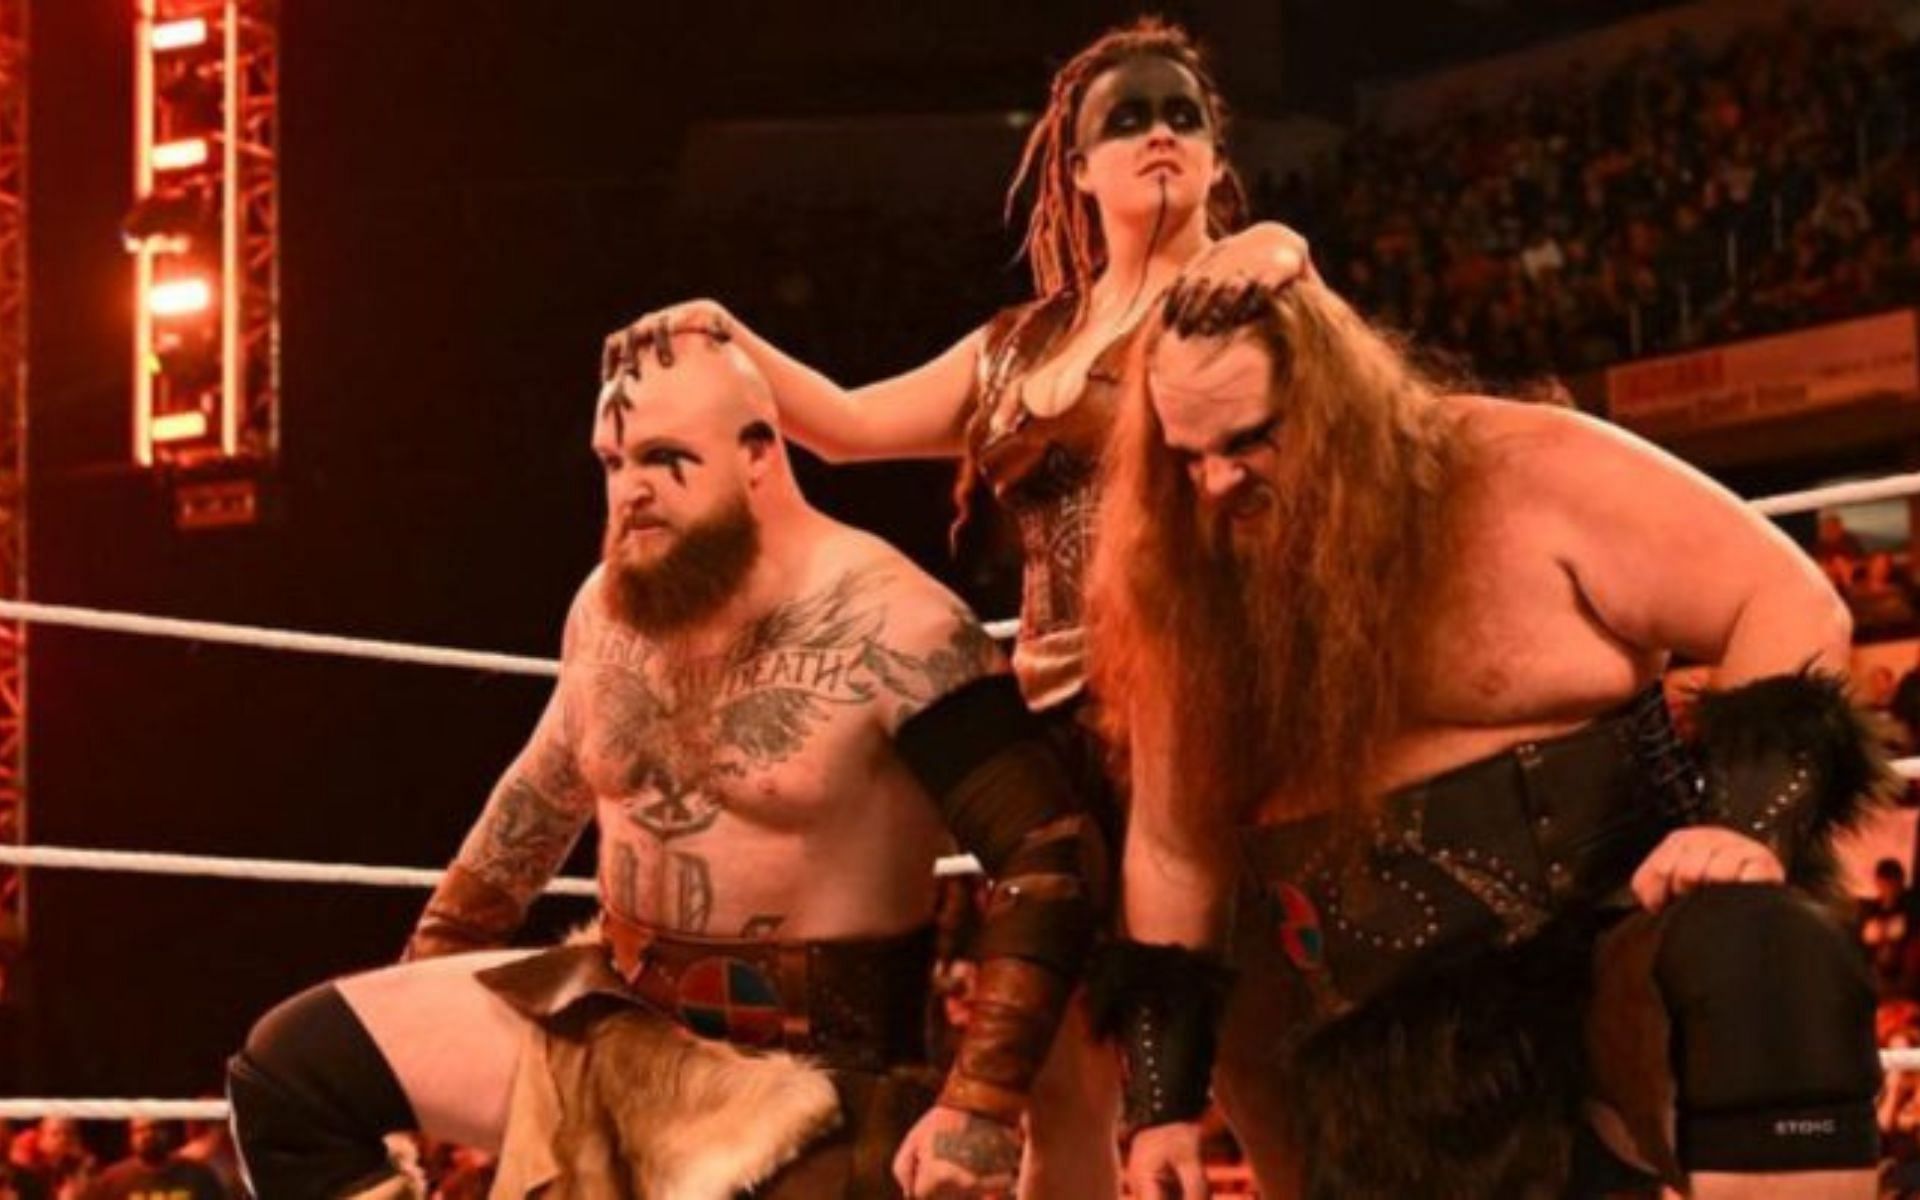 Valhalla has Erik and Ivar ready for The Usos!